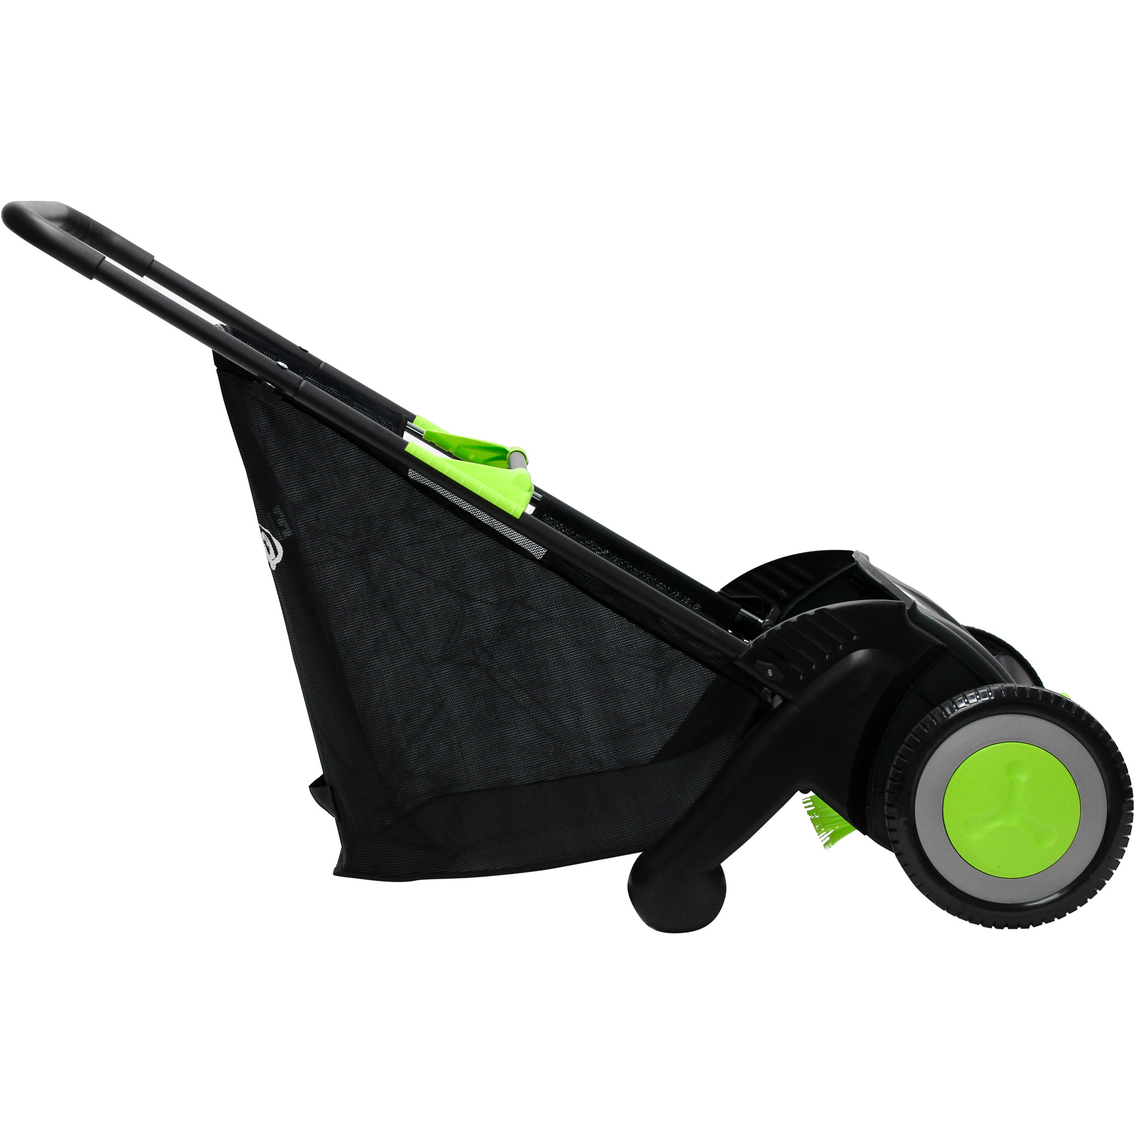 Earthwise 21 in. Lawn Sweeper - Image 5 of 5